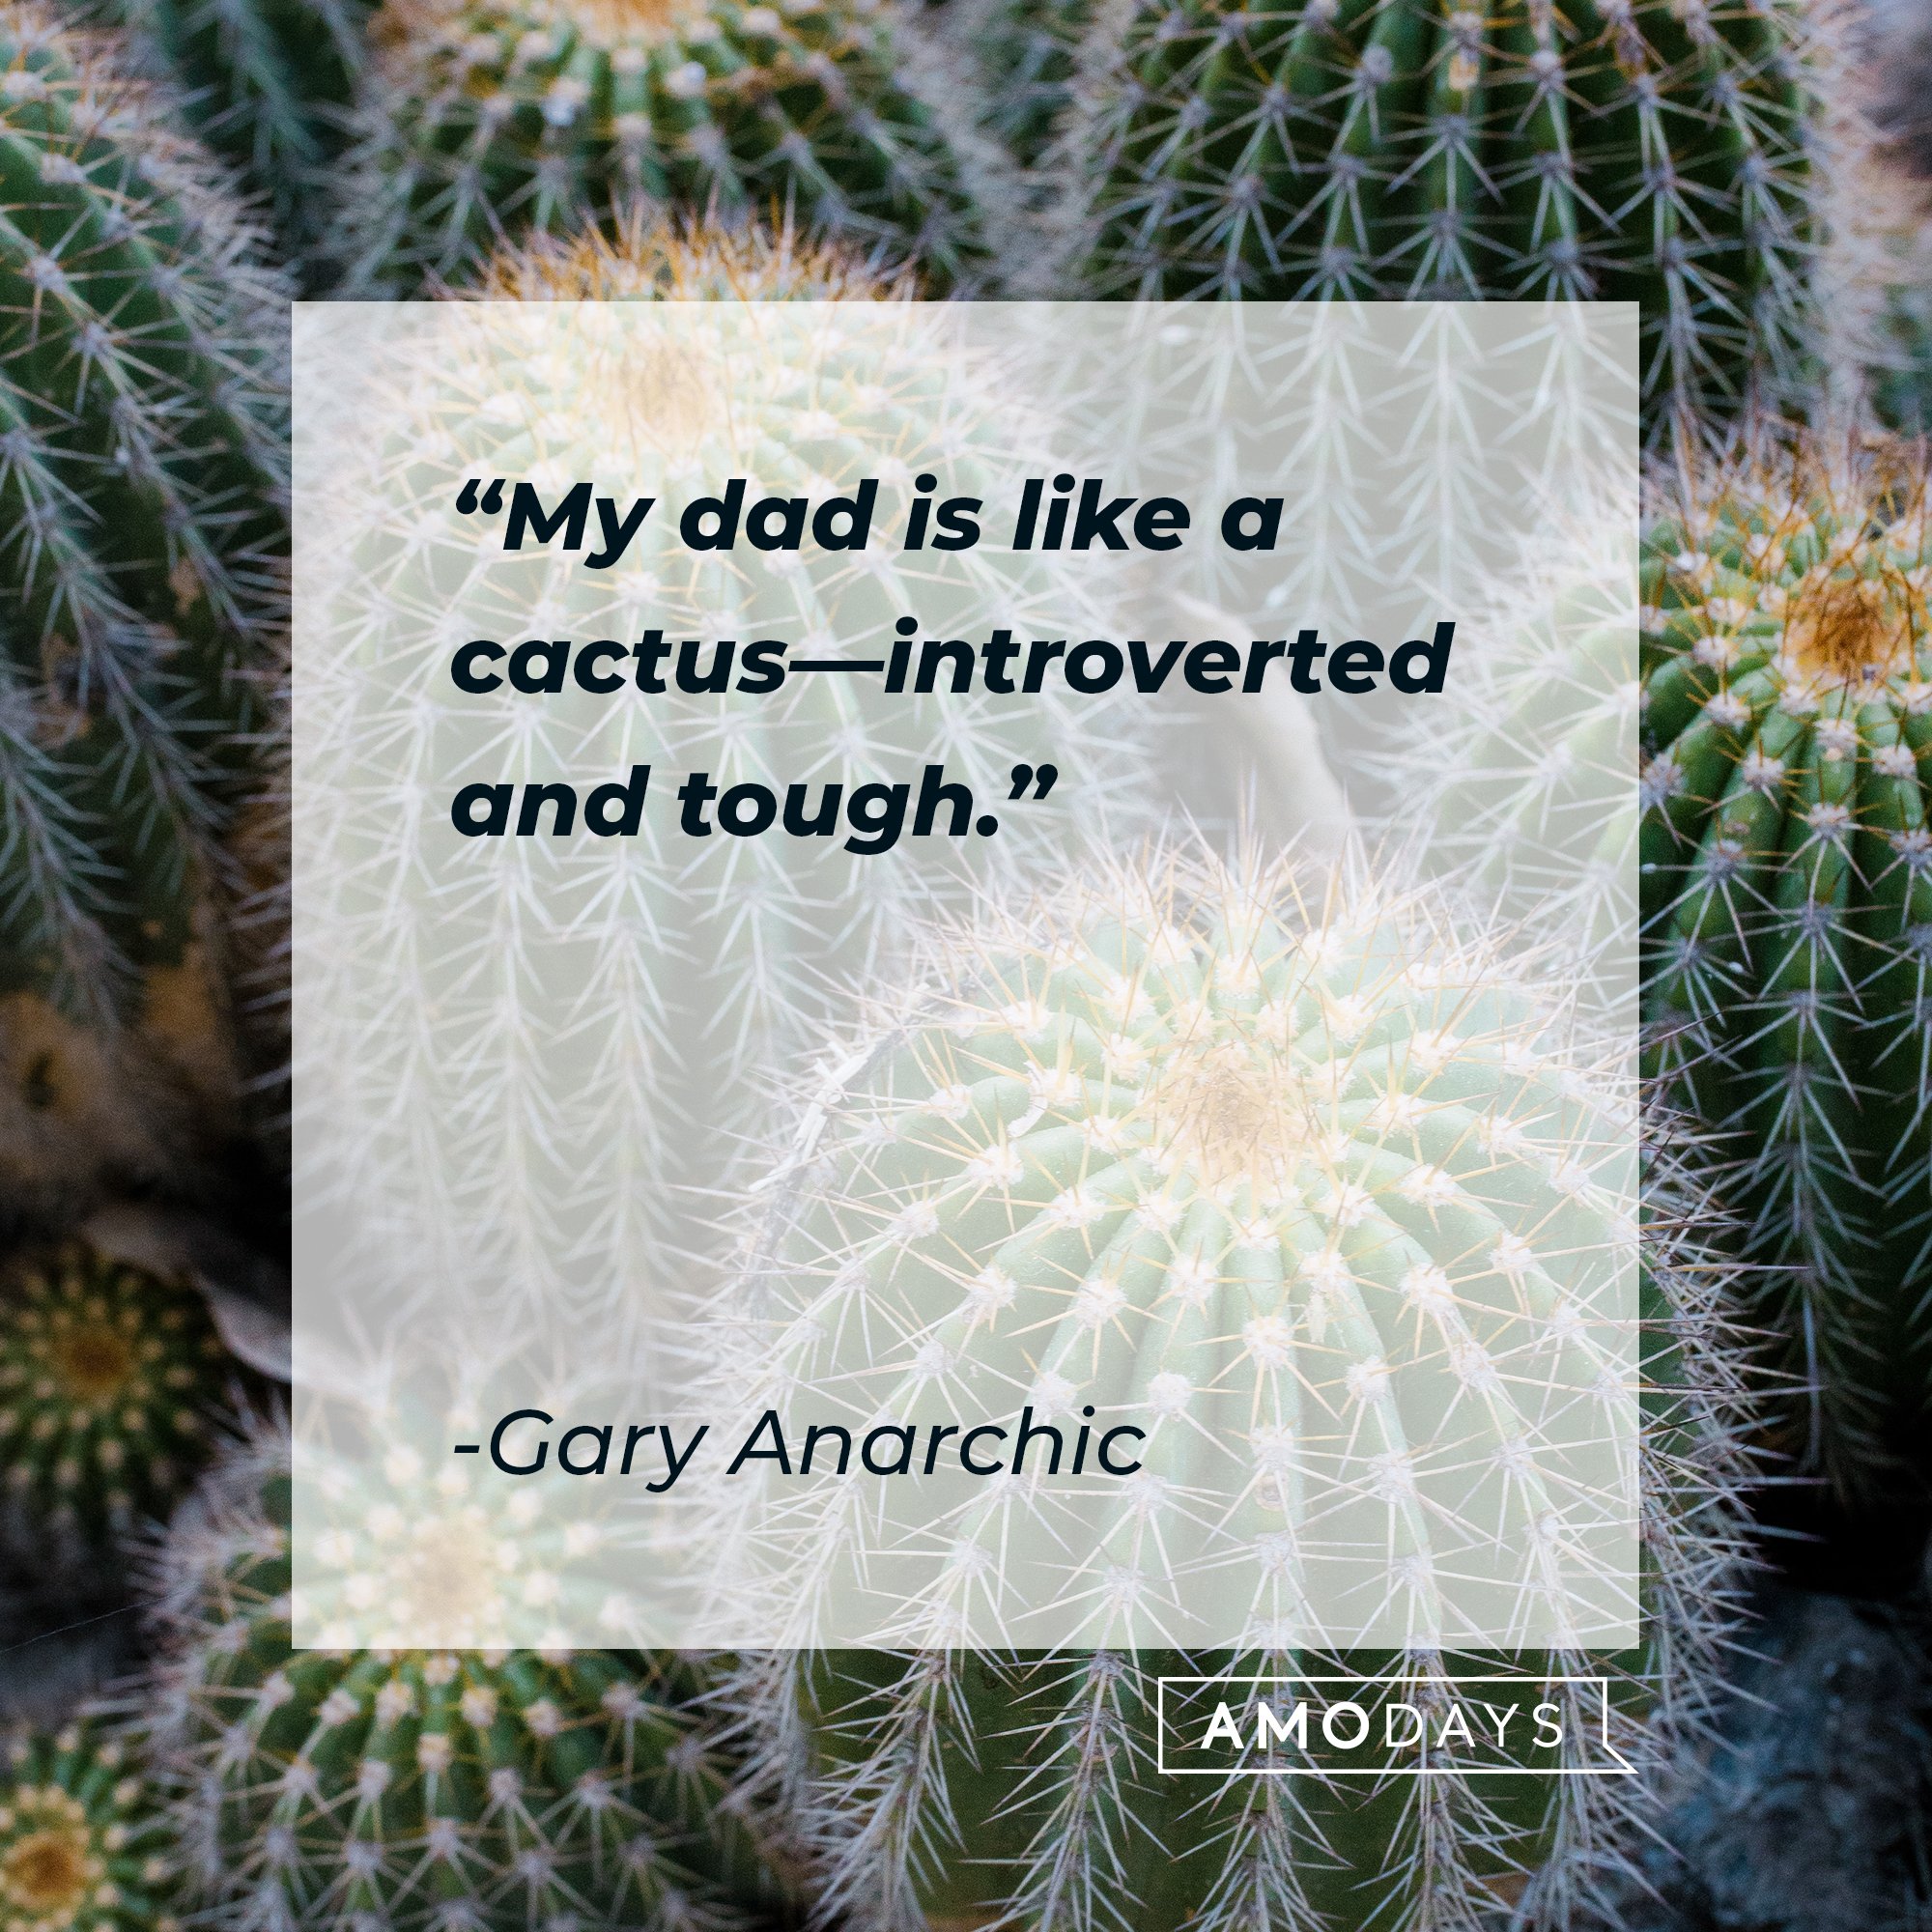 Gary Anarchic’s quote: "My dad is like a cactus—introverted and tough." | Image: AmoDays  